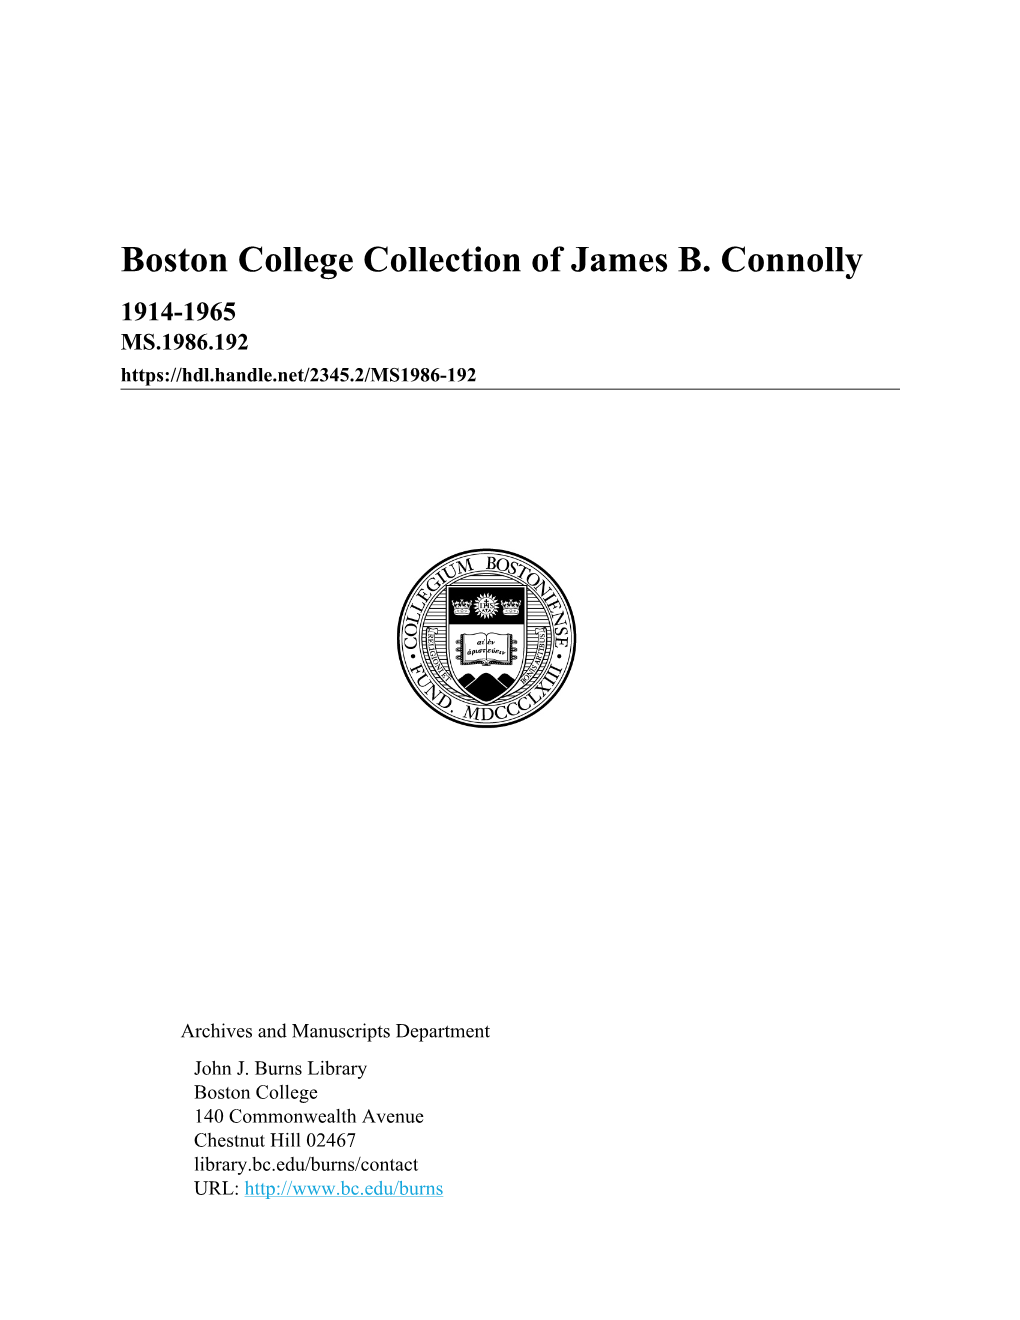 Boston College Collection of James B. Connolly 1914-1965 MS.1986.192